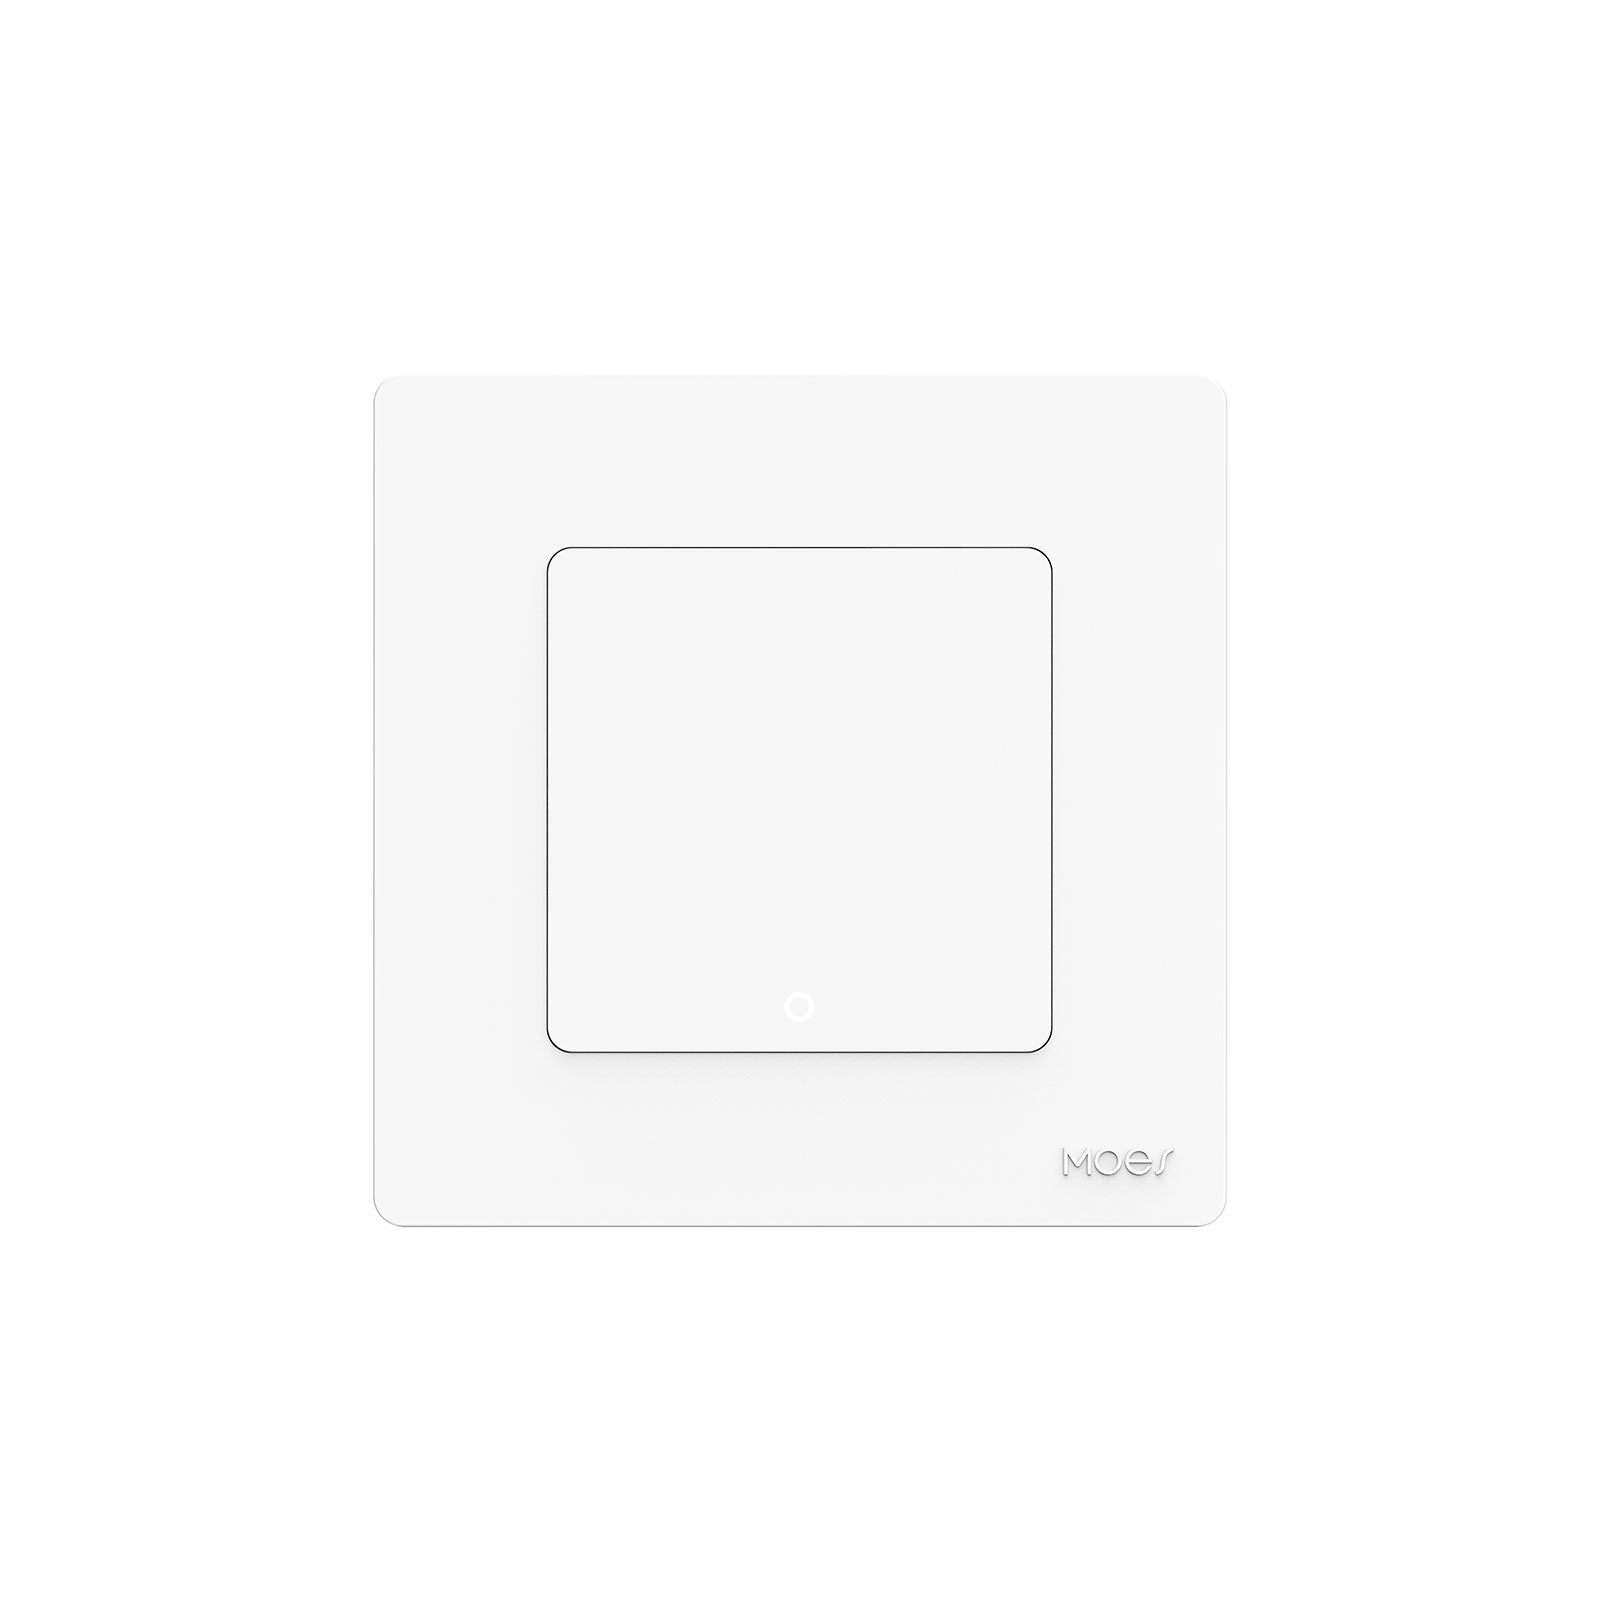 MOES New Star Ring Smart ZigBee3.0 Push Button Switch Embedded Light Touch Switch - MOES